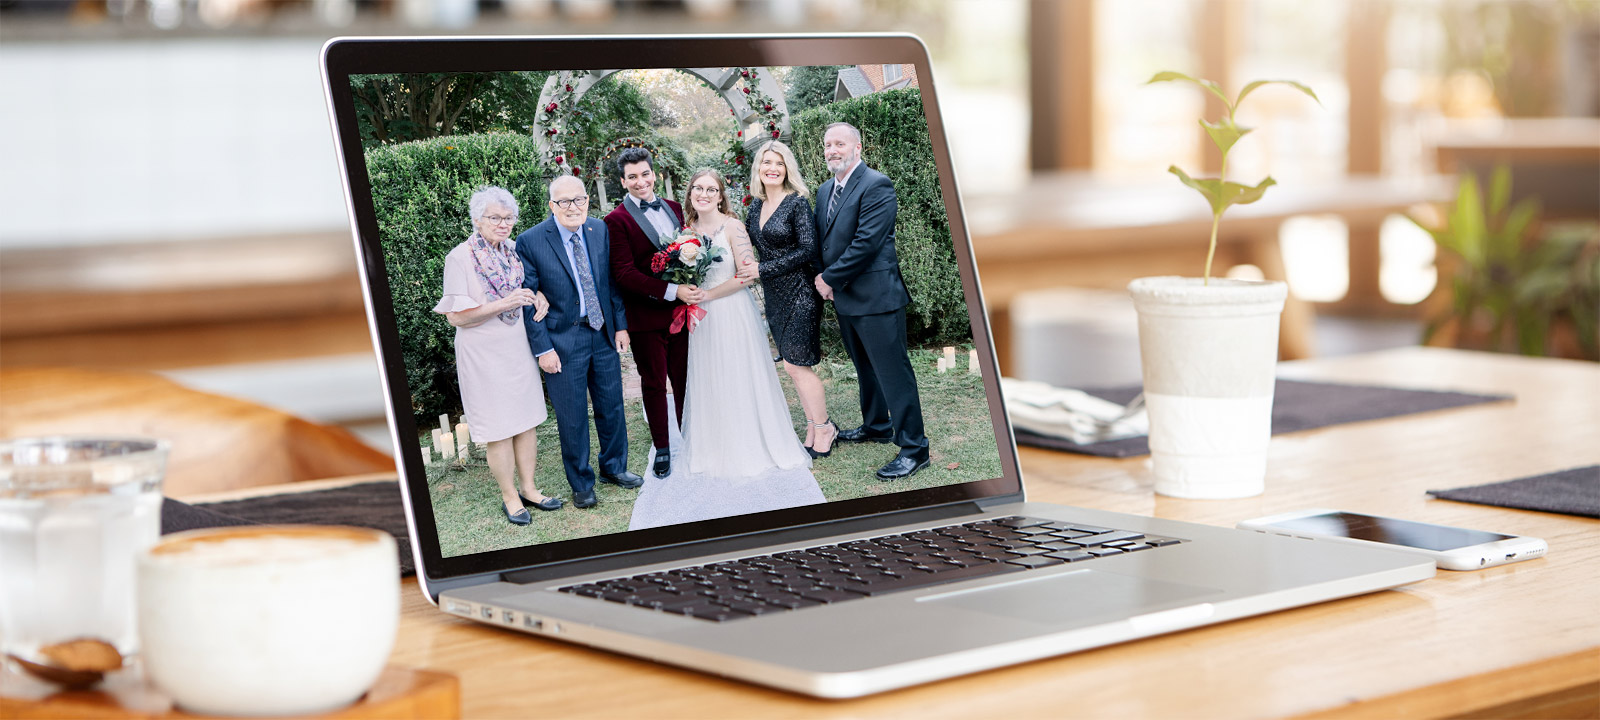 Weeding Photo Editing Services Page Header Photo